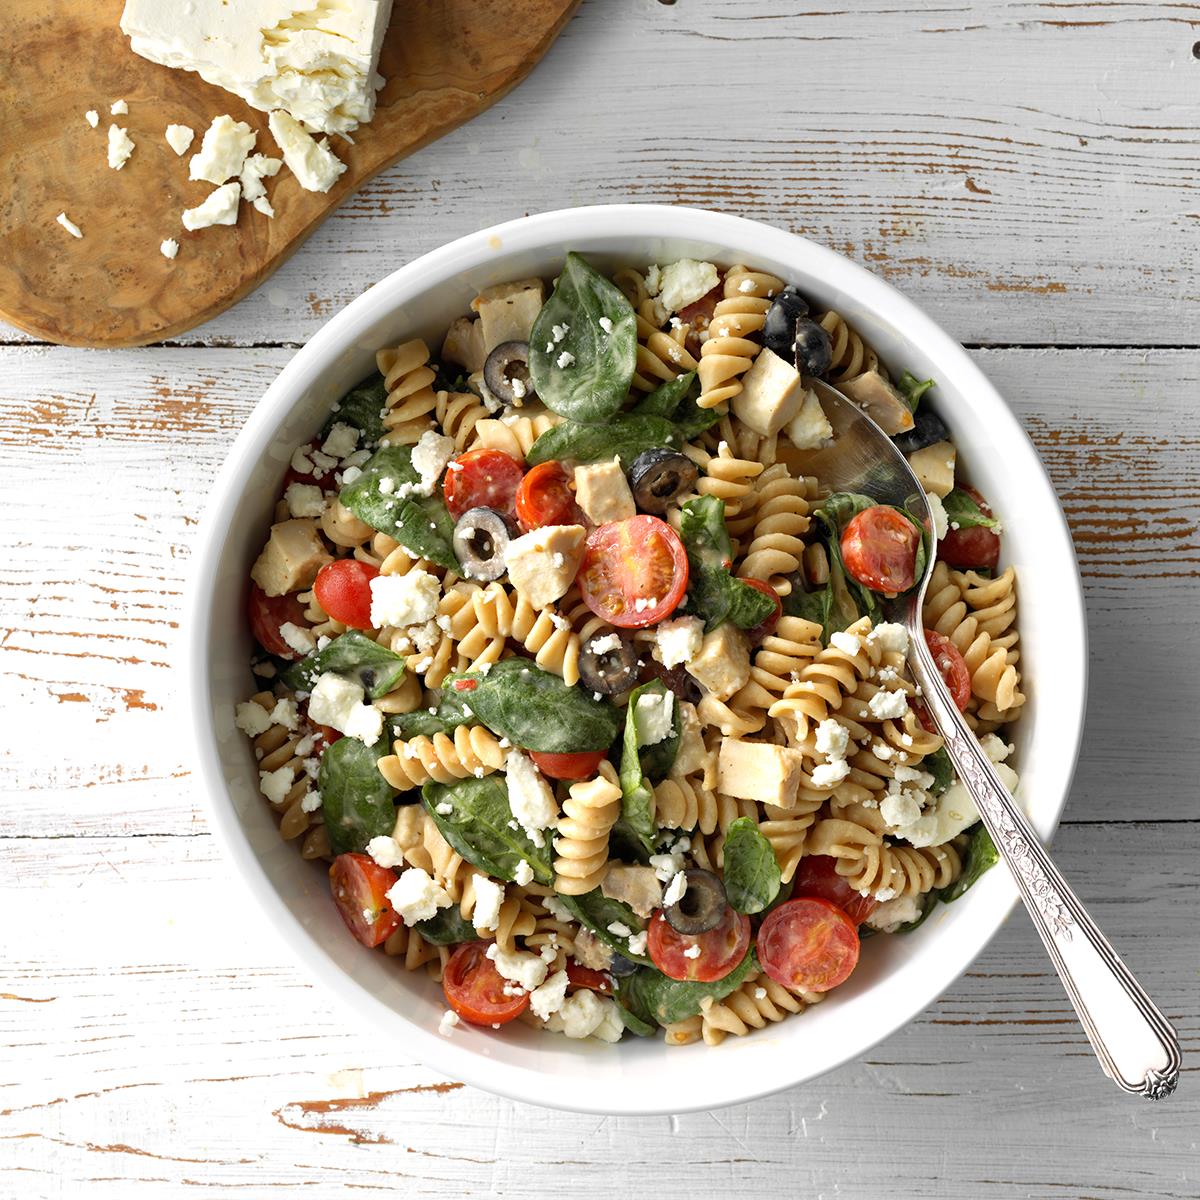 Chicken and Spinach Pasta Salad Recipe: How to Make It